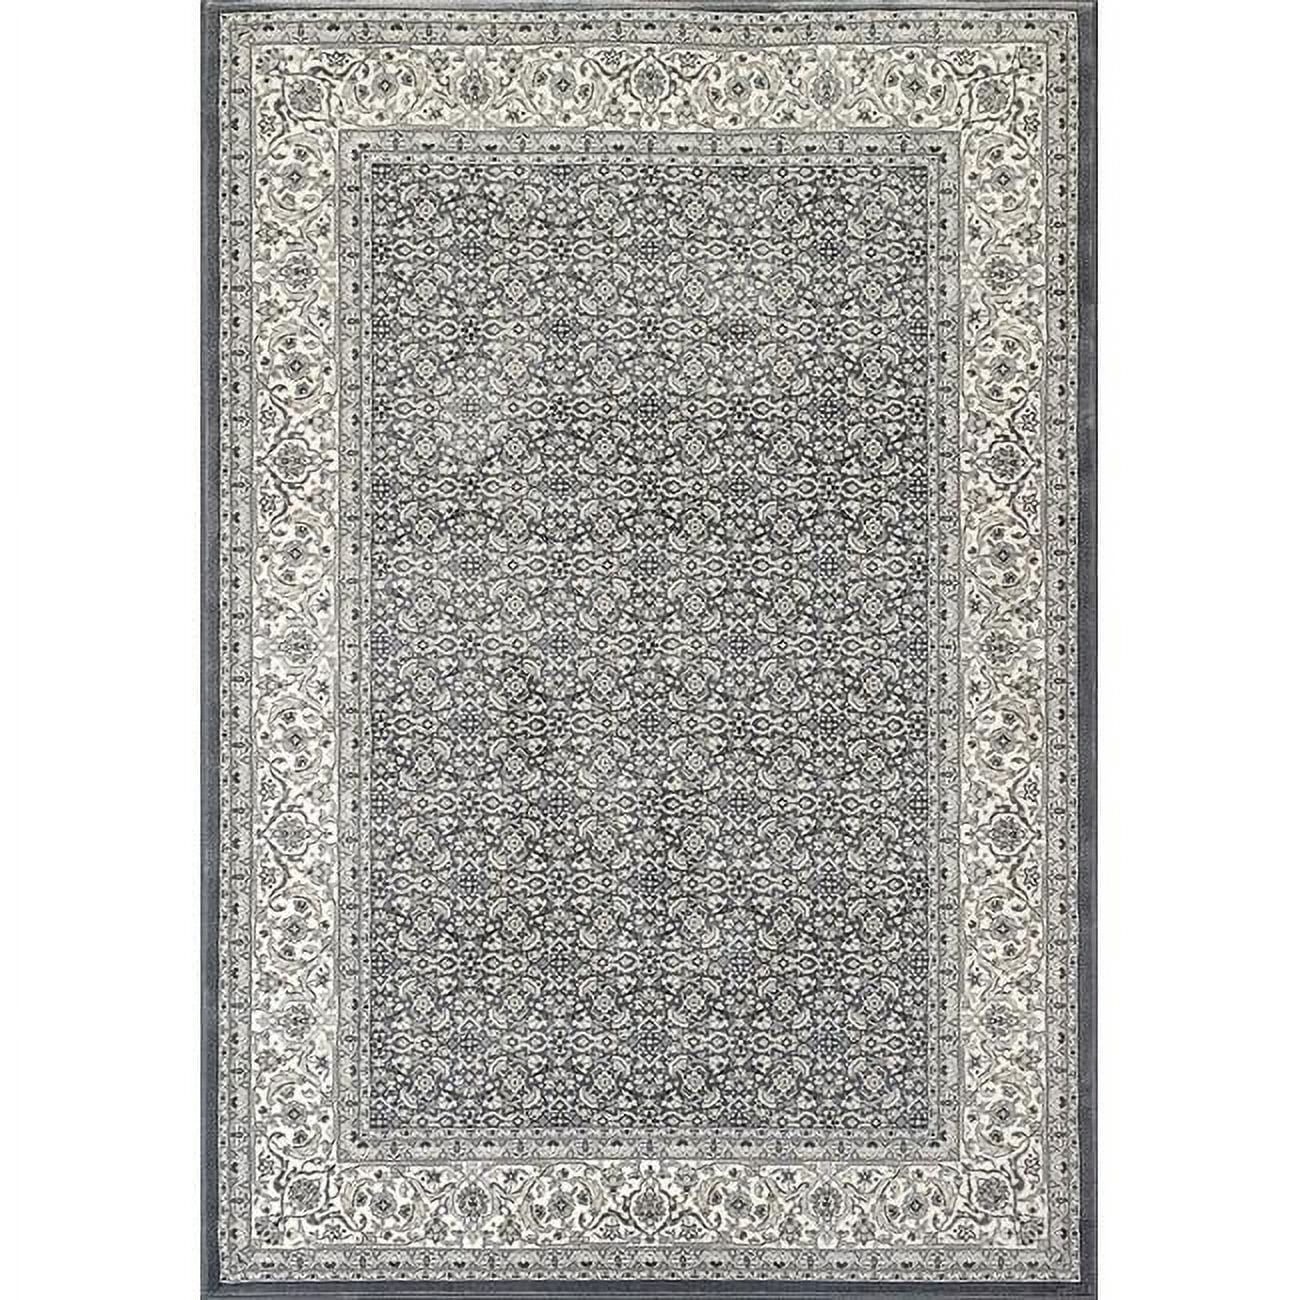 An912570115666 7 Ft. 10 X 11.2 In. Ancient 57011 Rectangle Traditional Rug - 5666 Grey & Cream